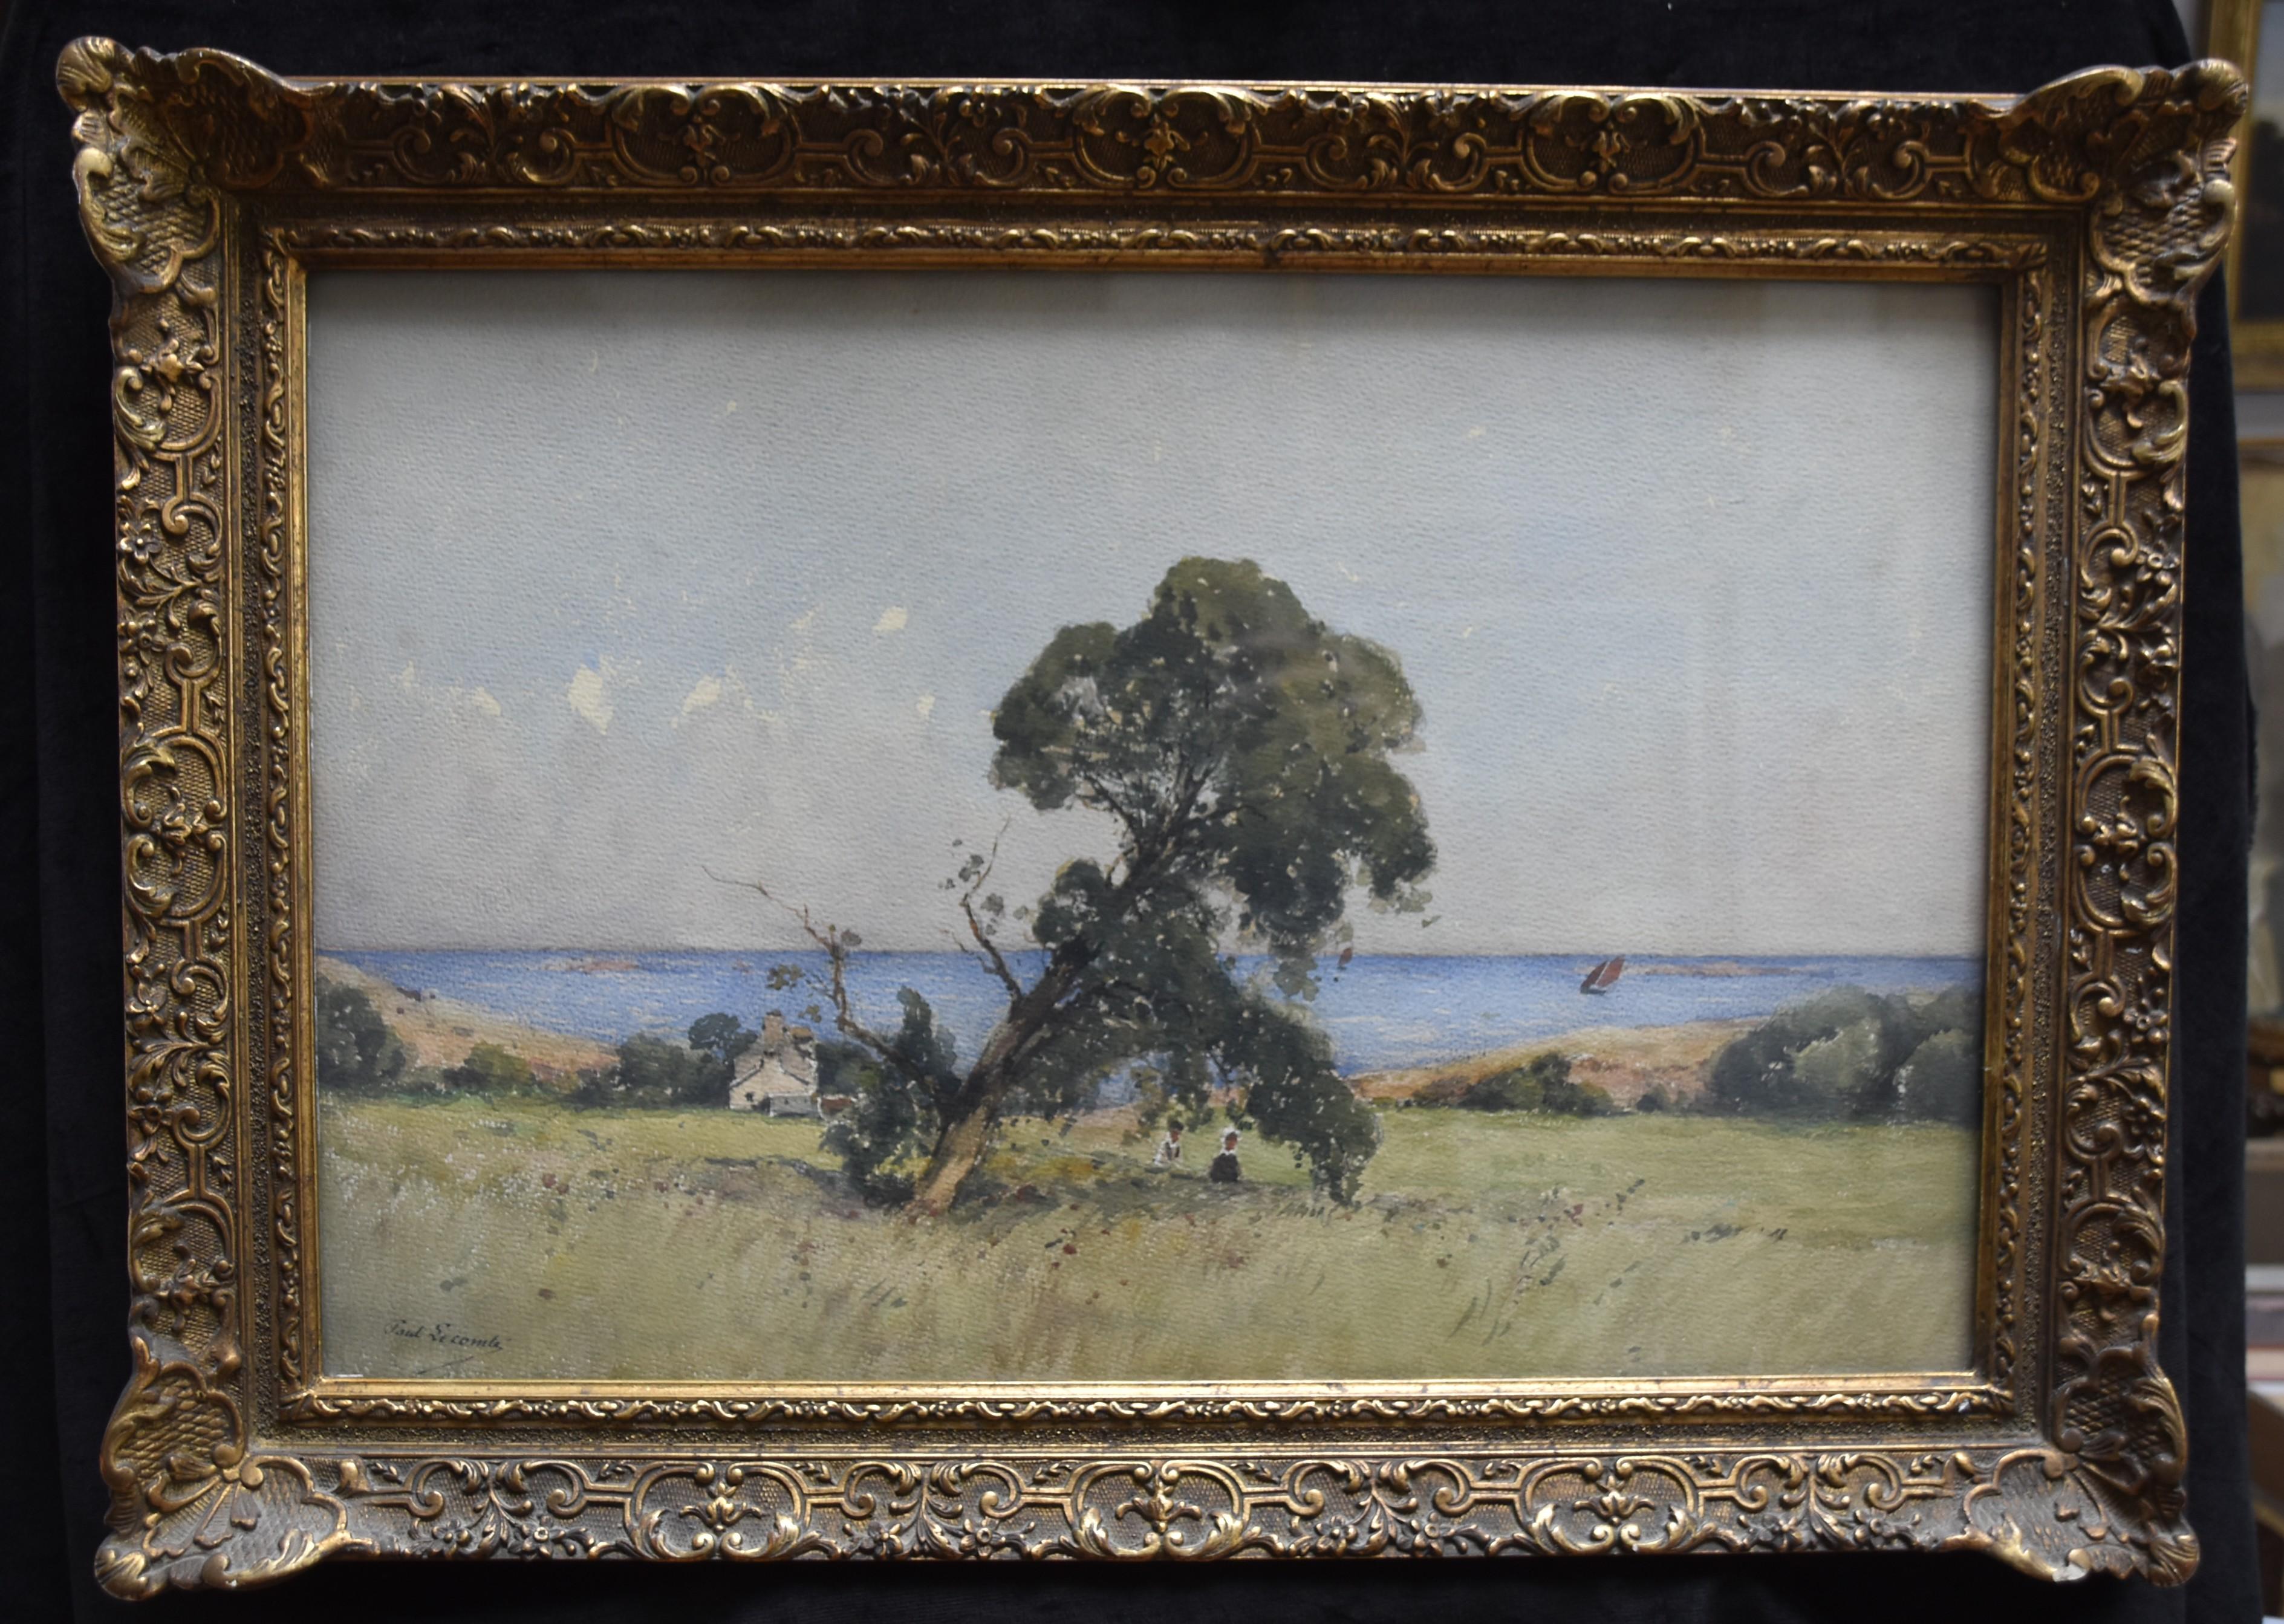 Paul Lecomte (1842-1920)
A Brittany Landscape
Watercolor on paper,
32 x 50 cm
Signed lower left
Vintage frame  :  43.5 x 61 cm, as visible on the detail photographs two lacks in the moulding of the frame, one in the upper left and a small one in the